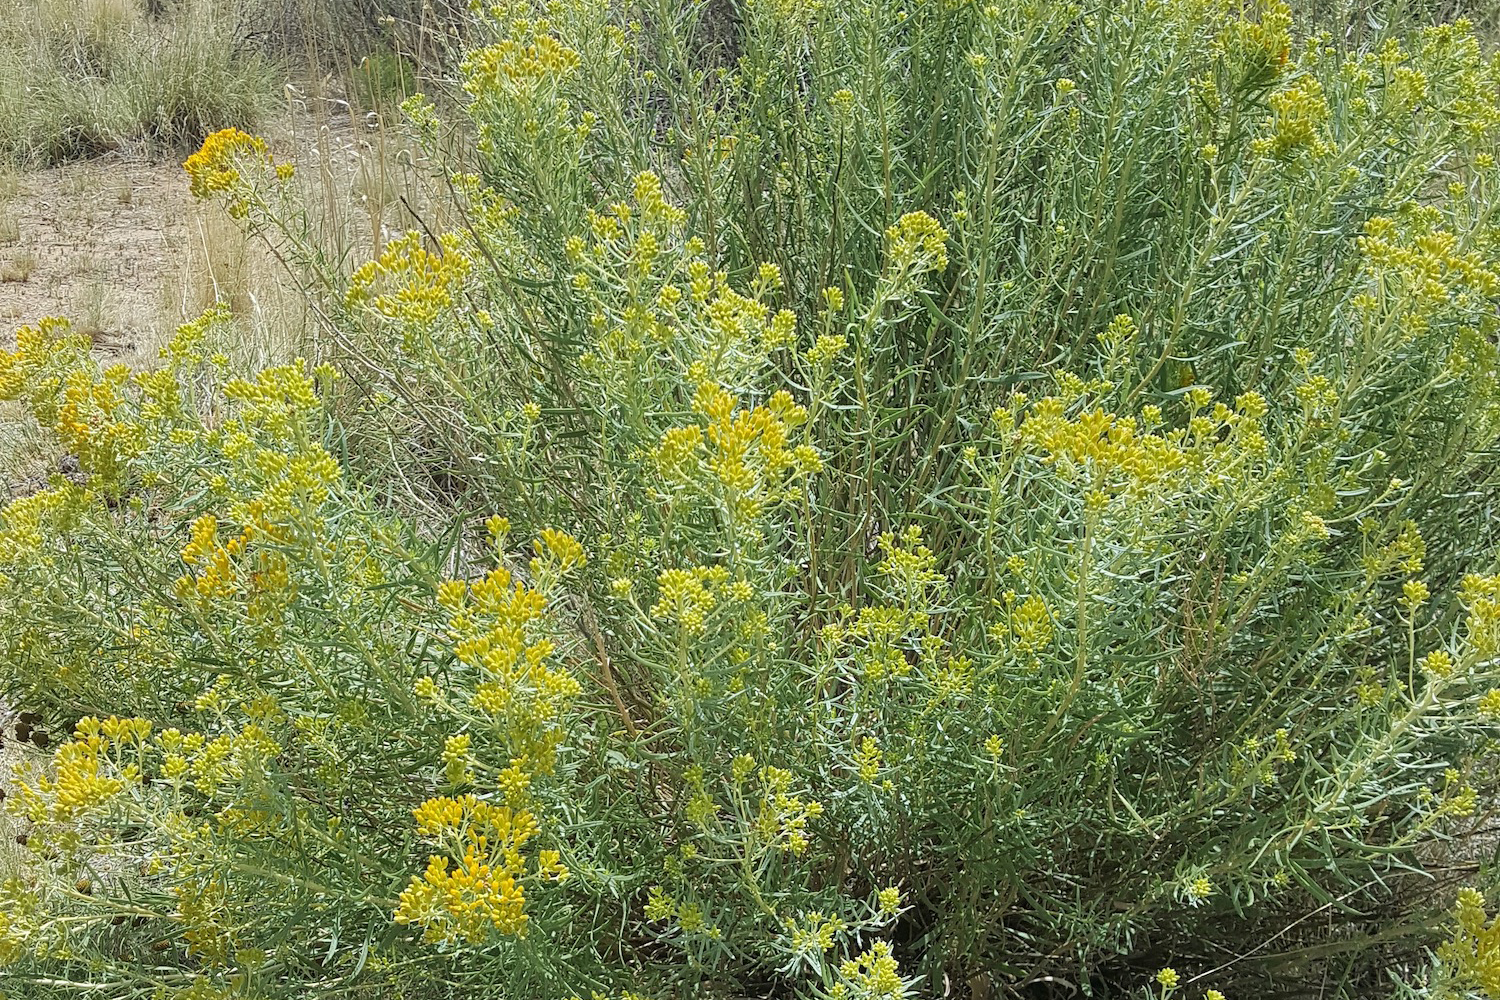 Tall green stems with abundant green narrow leaves and sparse yellow flowerheads.